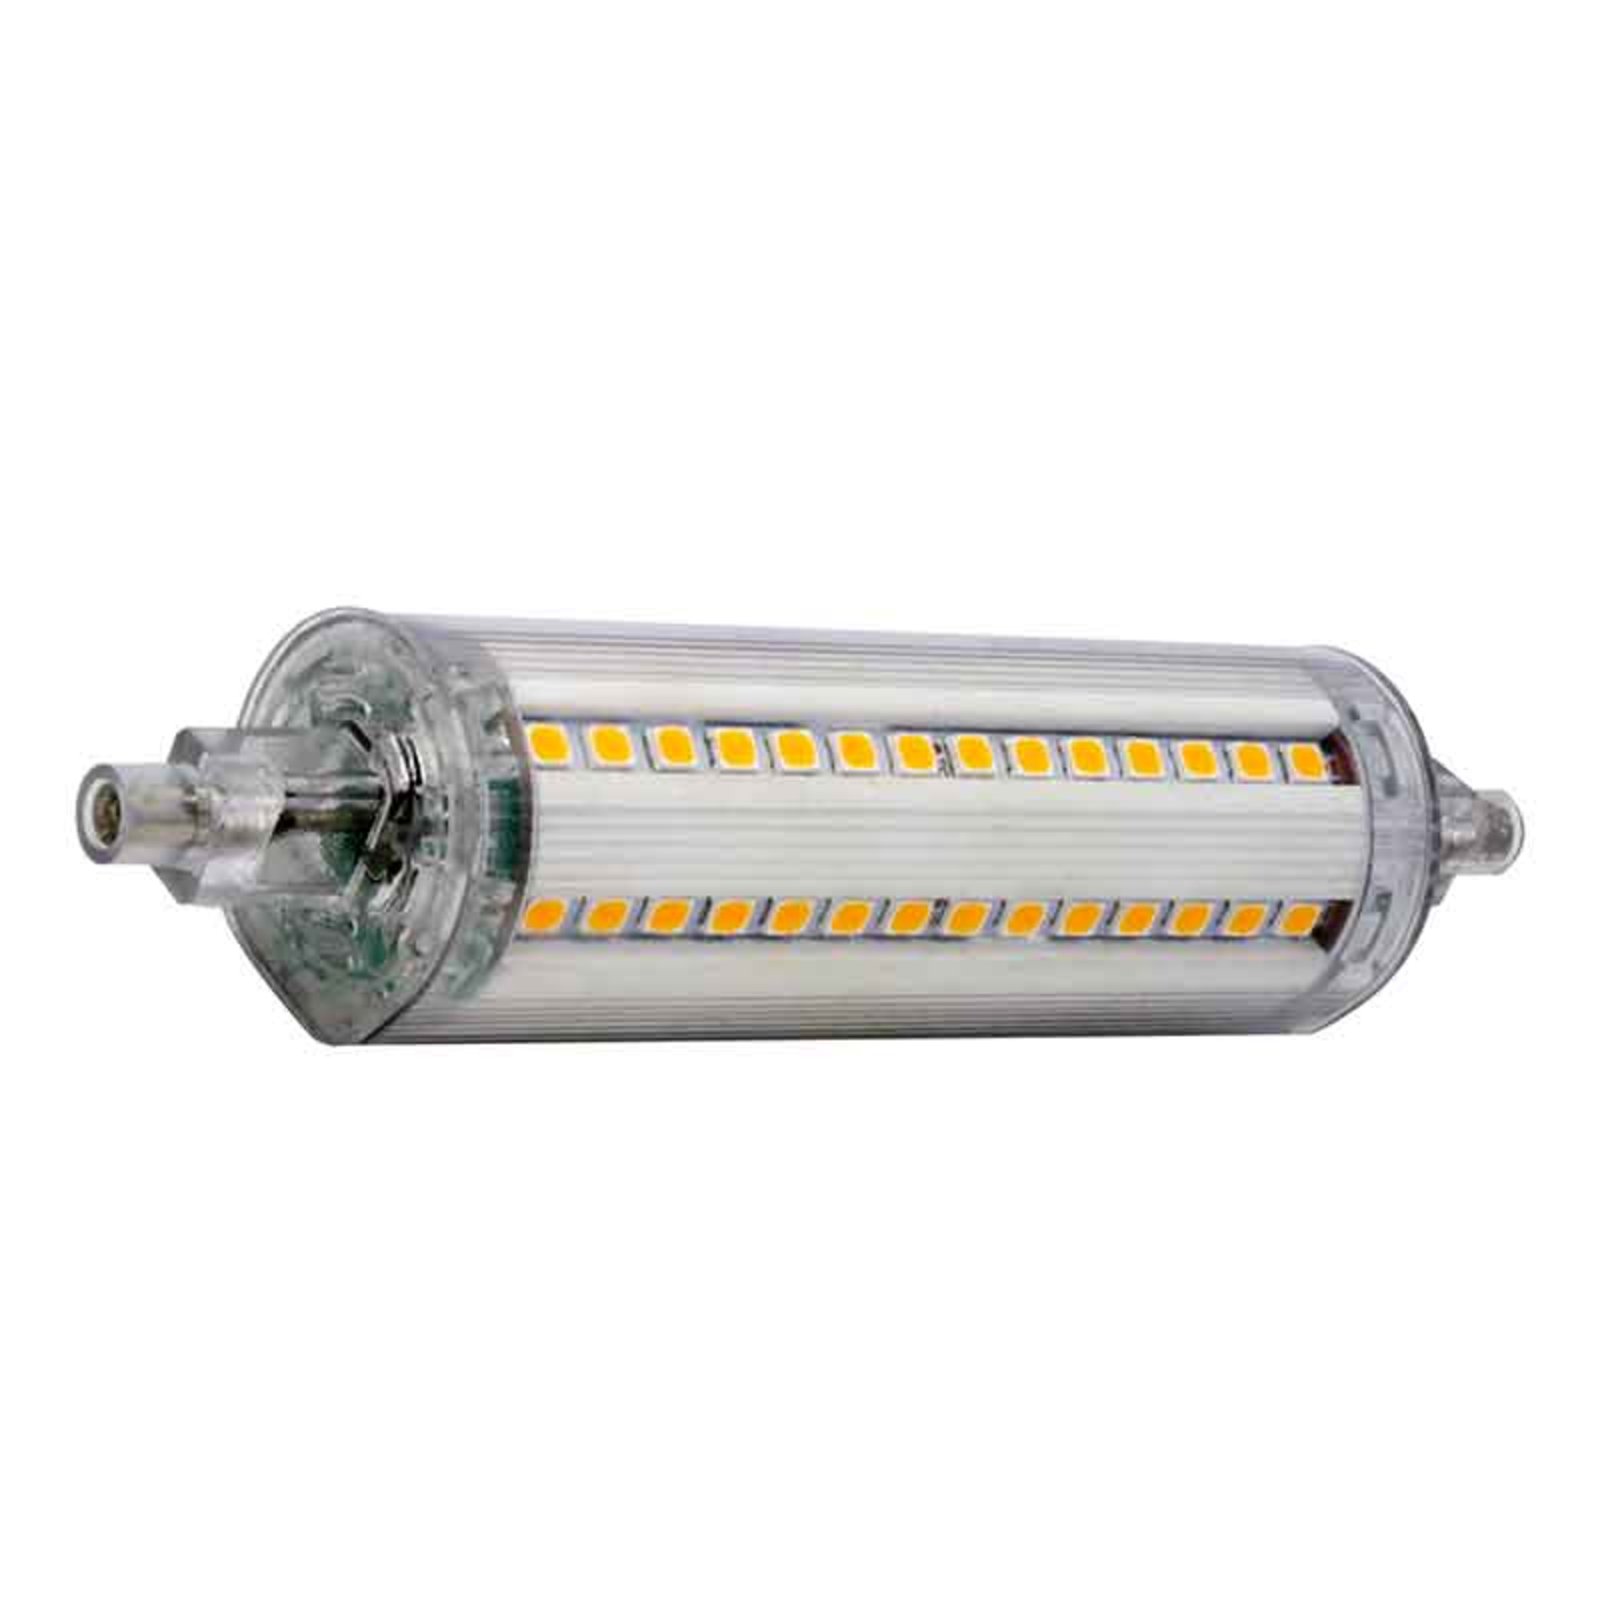 R7s 118mm LED staaflamp 9W universeel wit